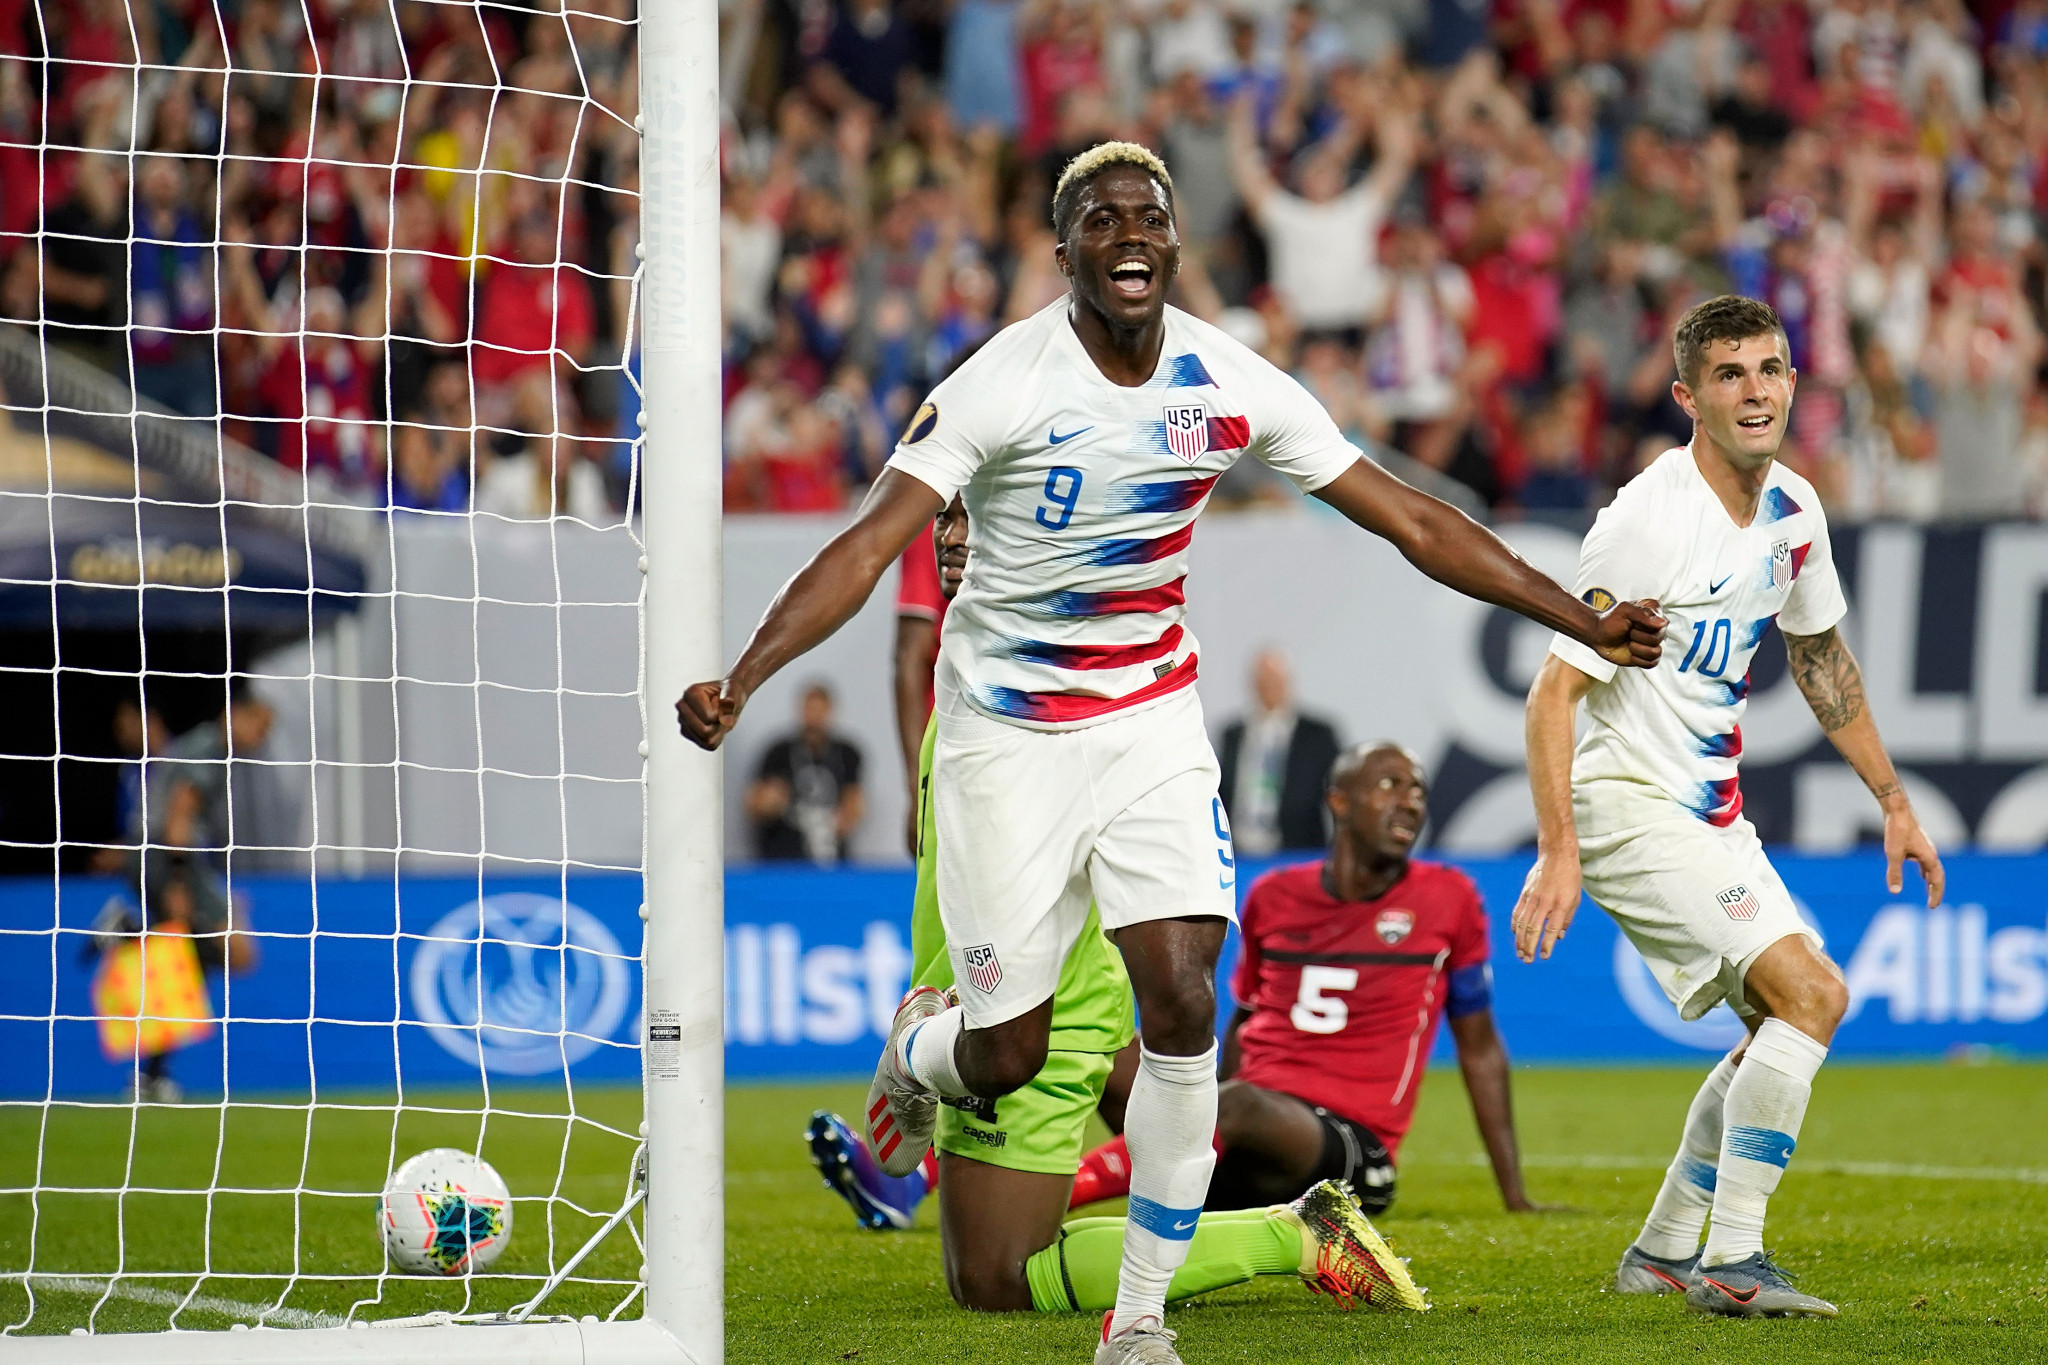 United States and Panama reach Gold Cup quarter finals with high scoring victories